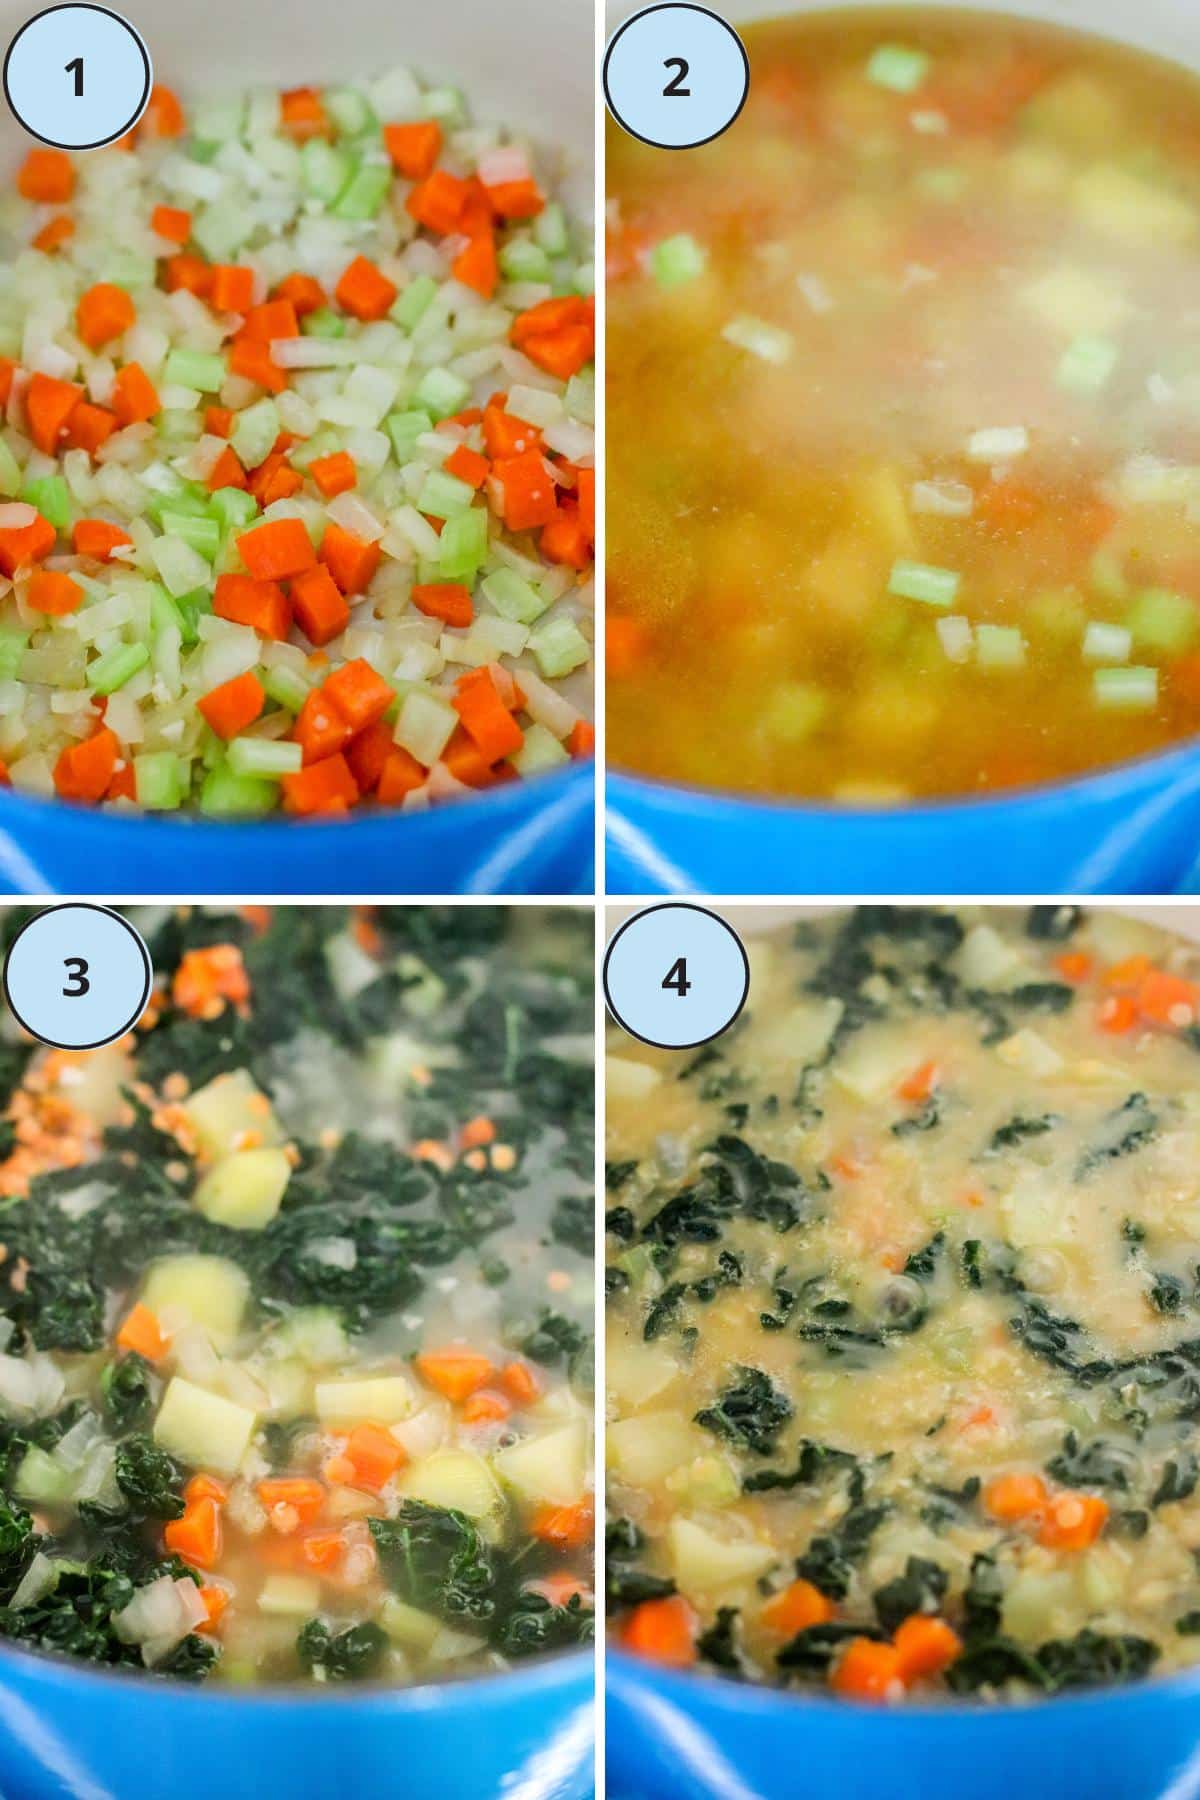 4 numbered steps showing how to prepare this recipe.